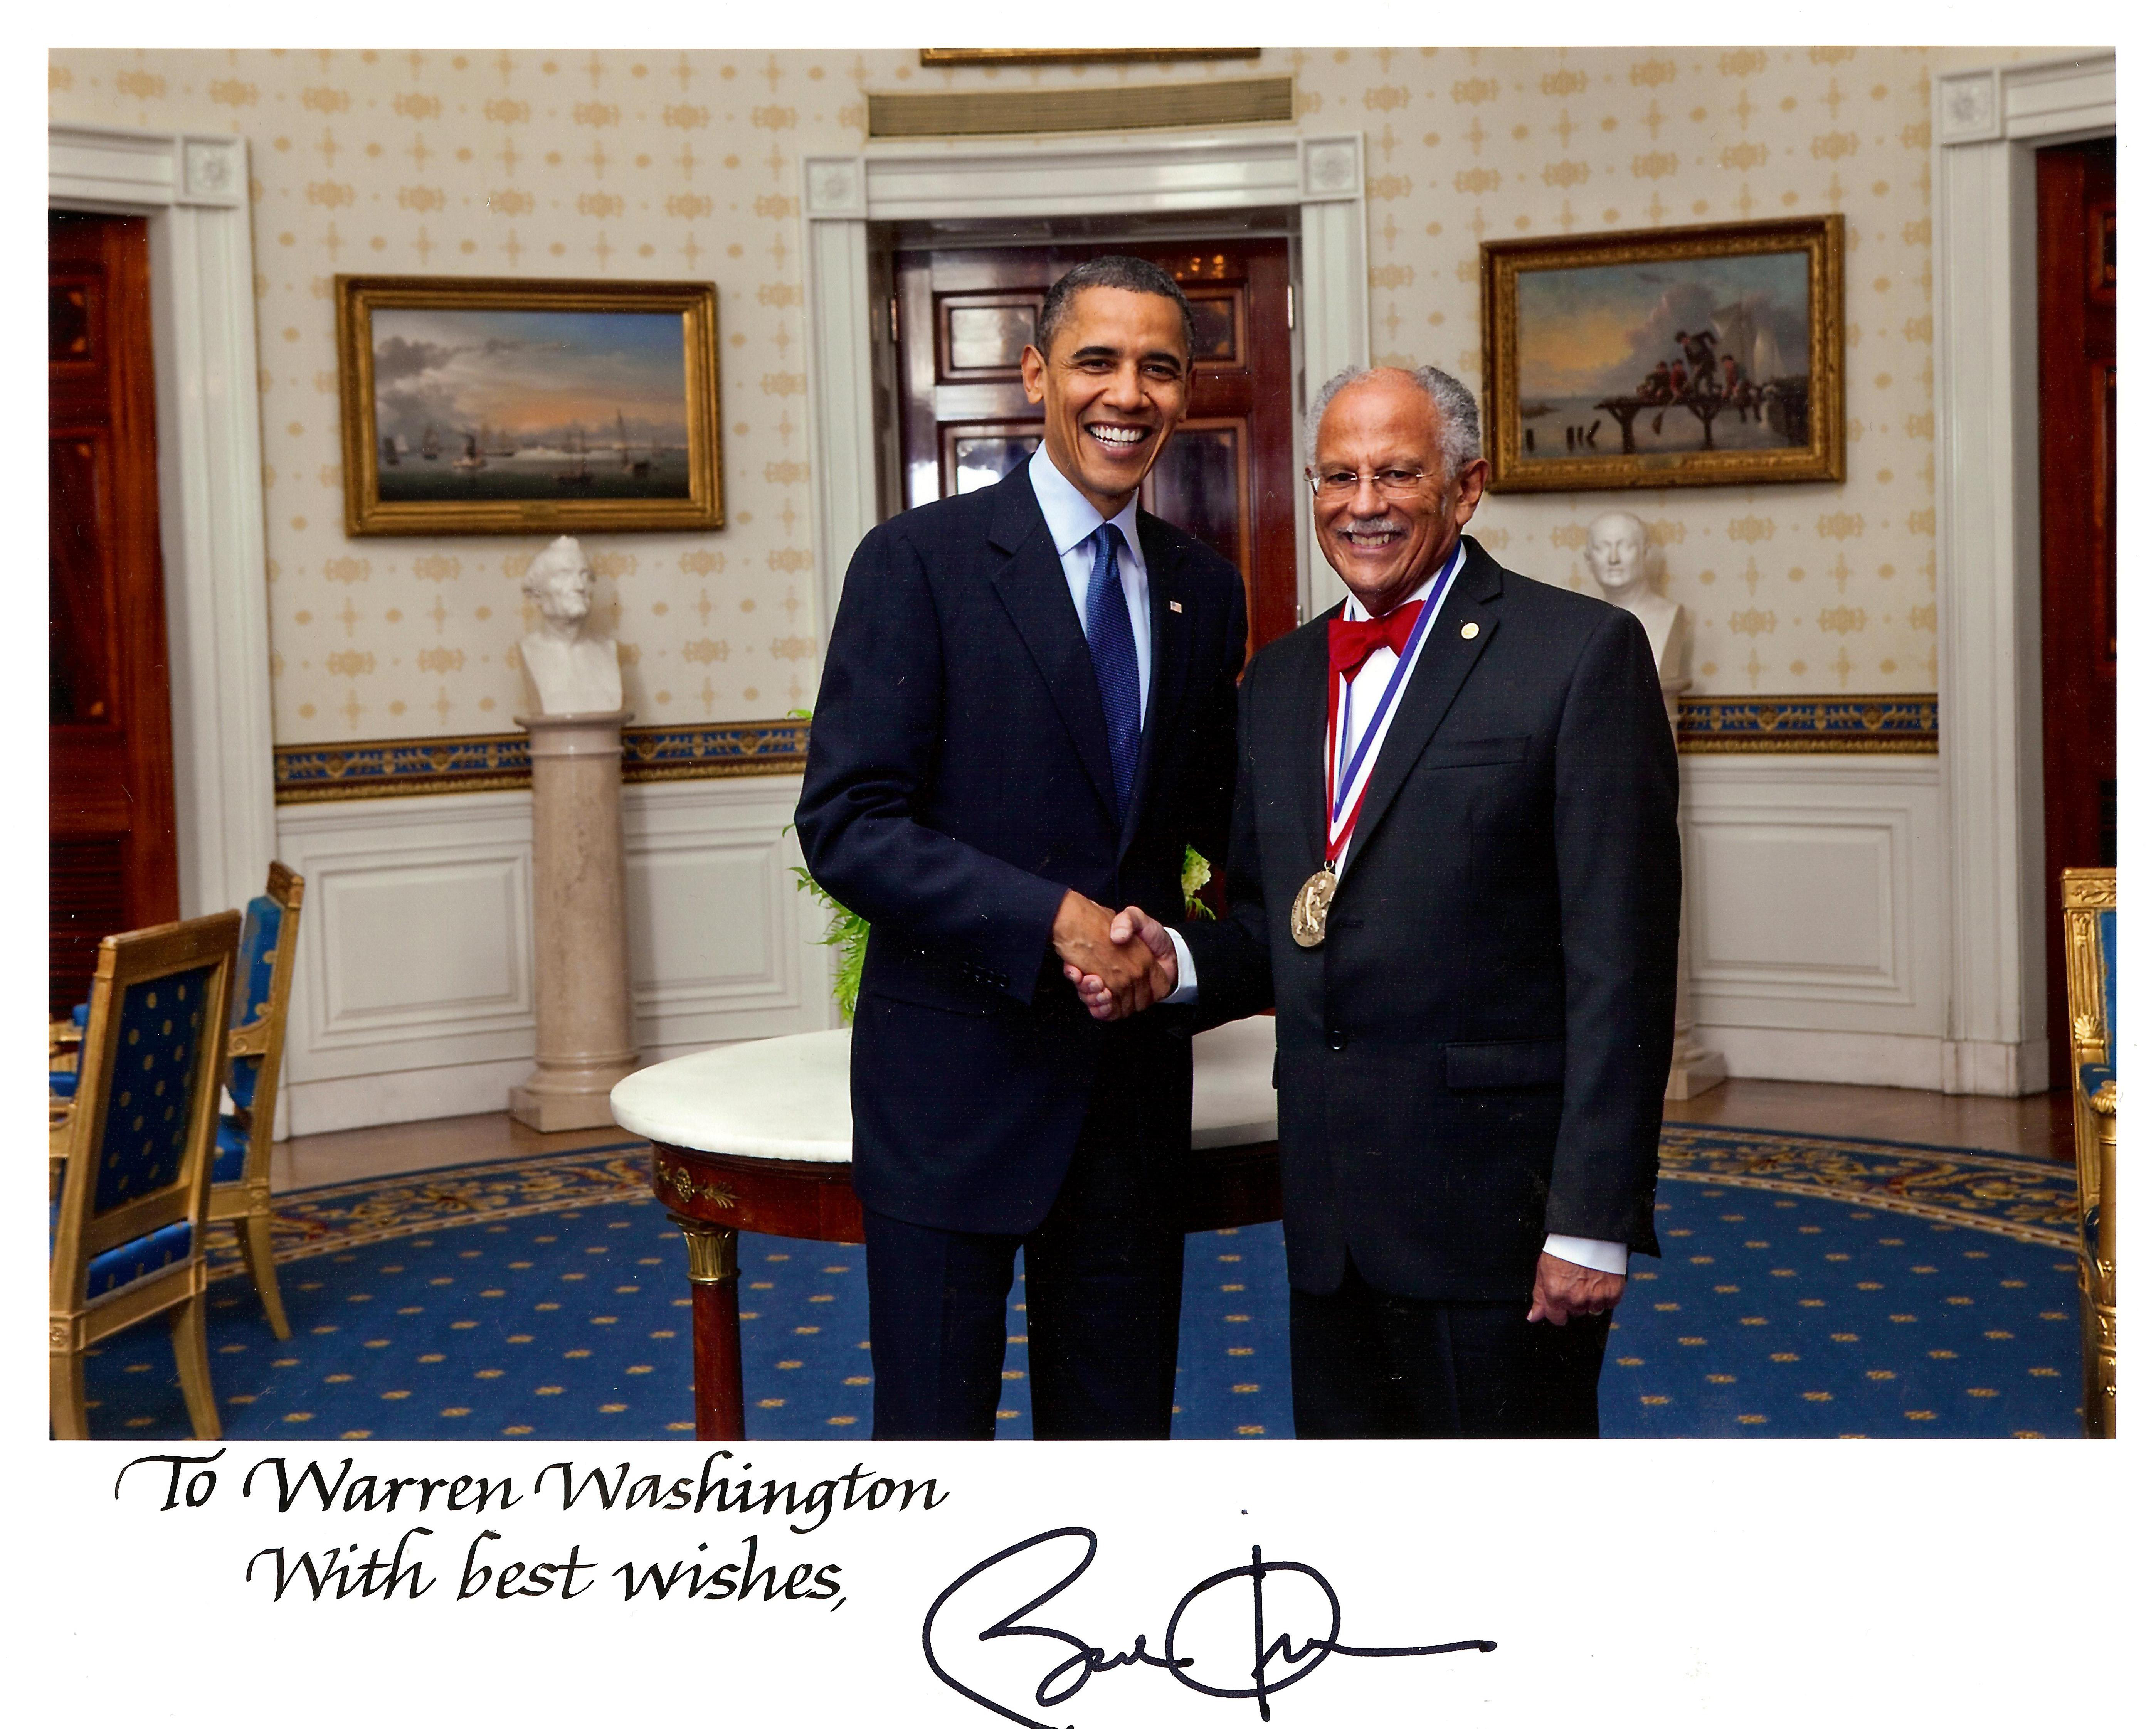 Dr. Washington was awarded the  the 2009 National Medal of Science by President Barack Obama